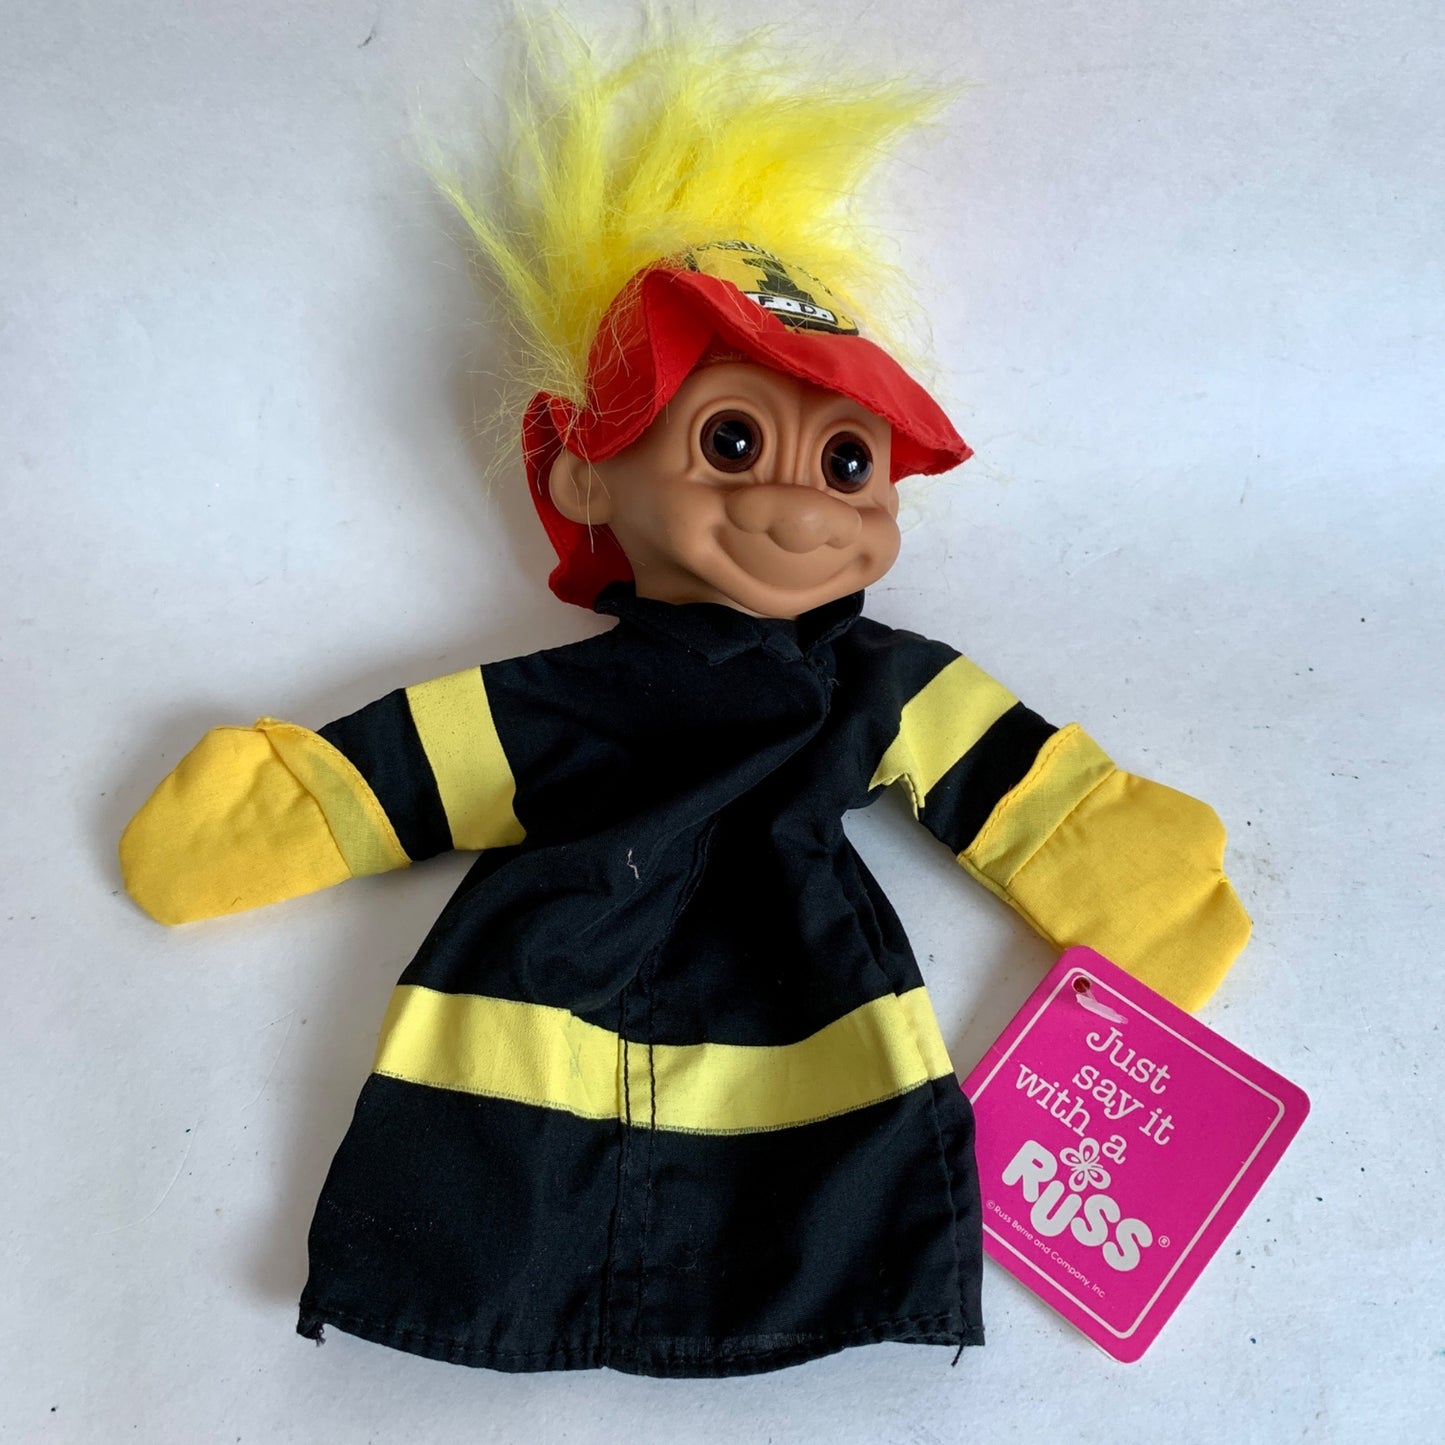 Russ Troll Vintage Fireman Firefighter Puppet WITH TAGS